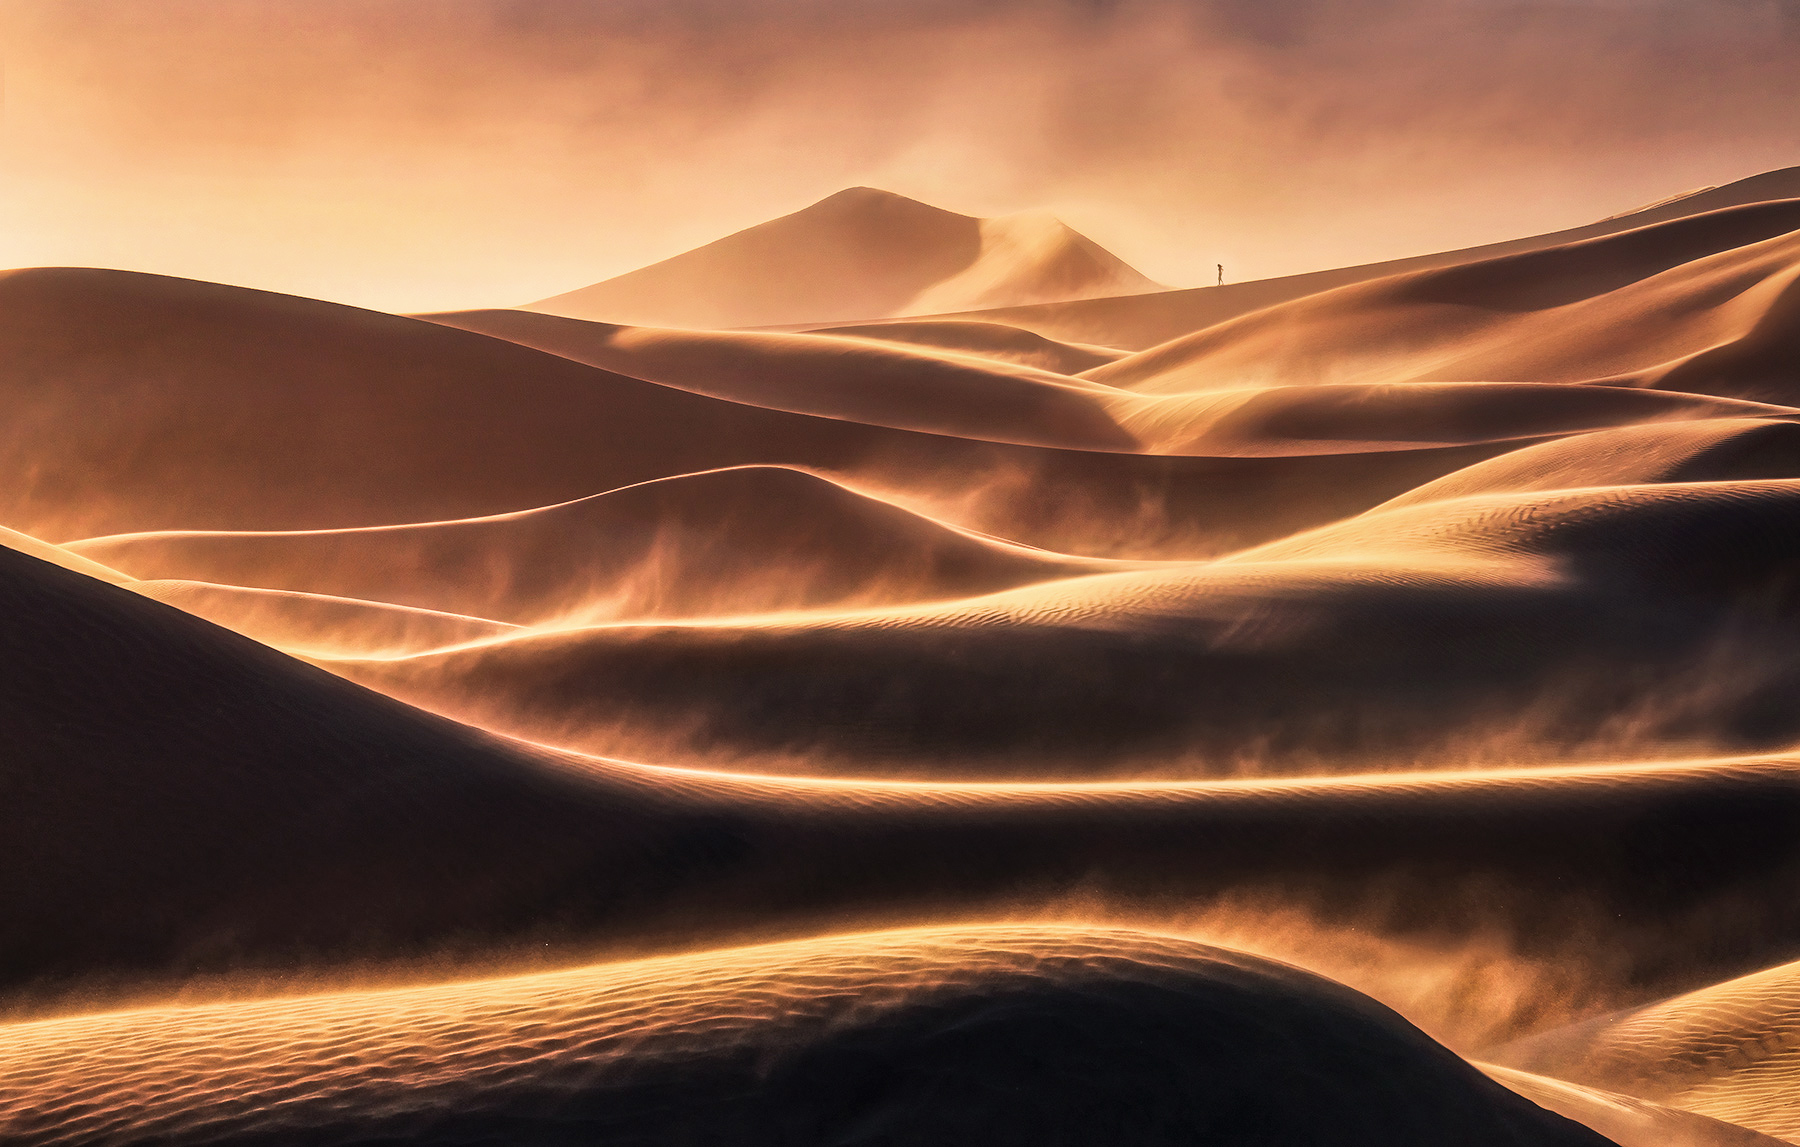 A lone person (seen clearly when viewed larger) walks the blowing sands in a windstorm on the dunes at sunset.